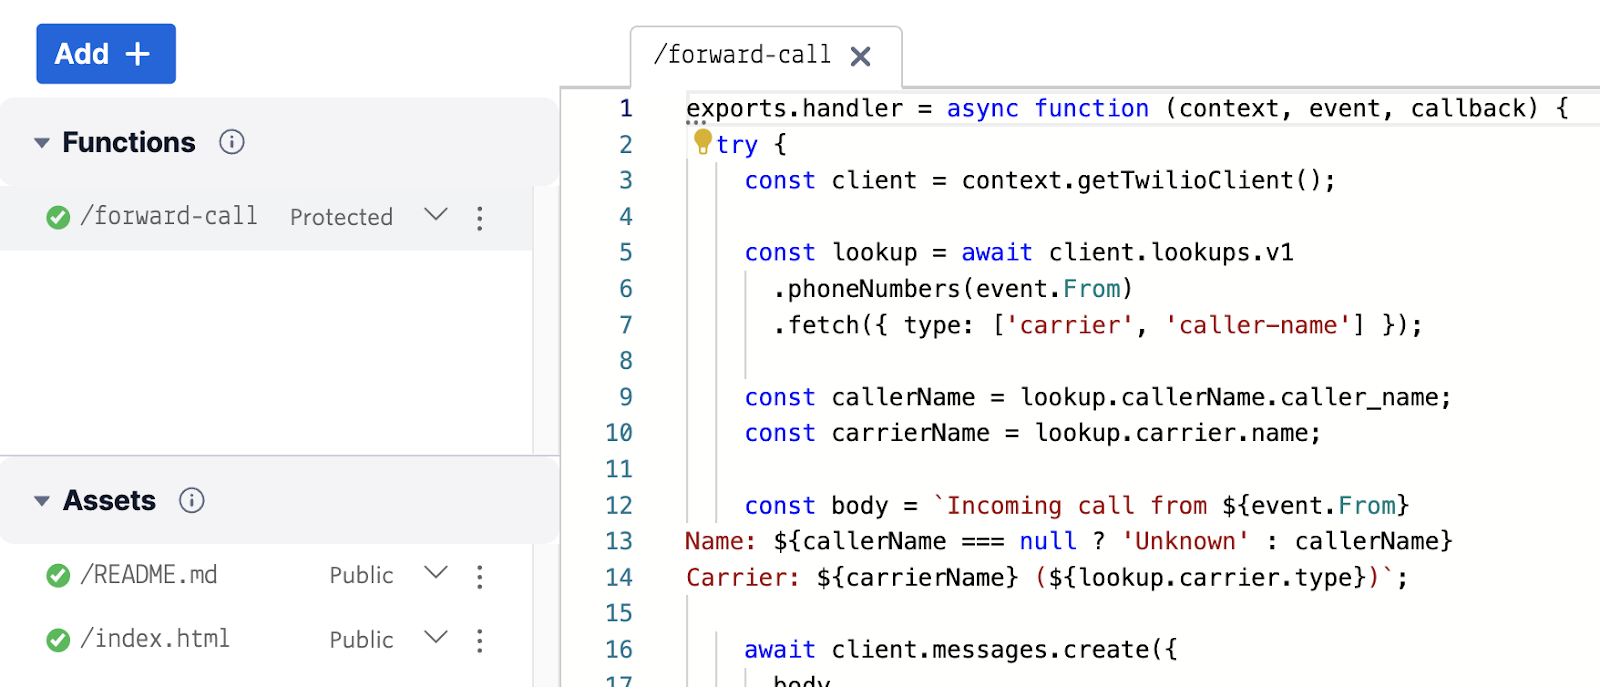 Screen shot of Twilio Functions console showing forward call function text